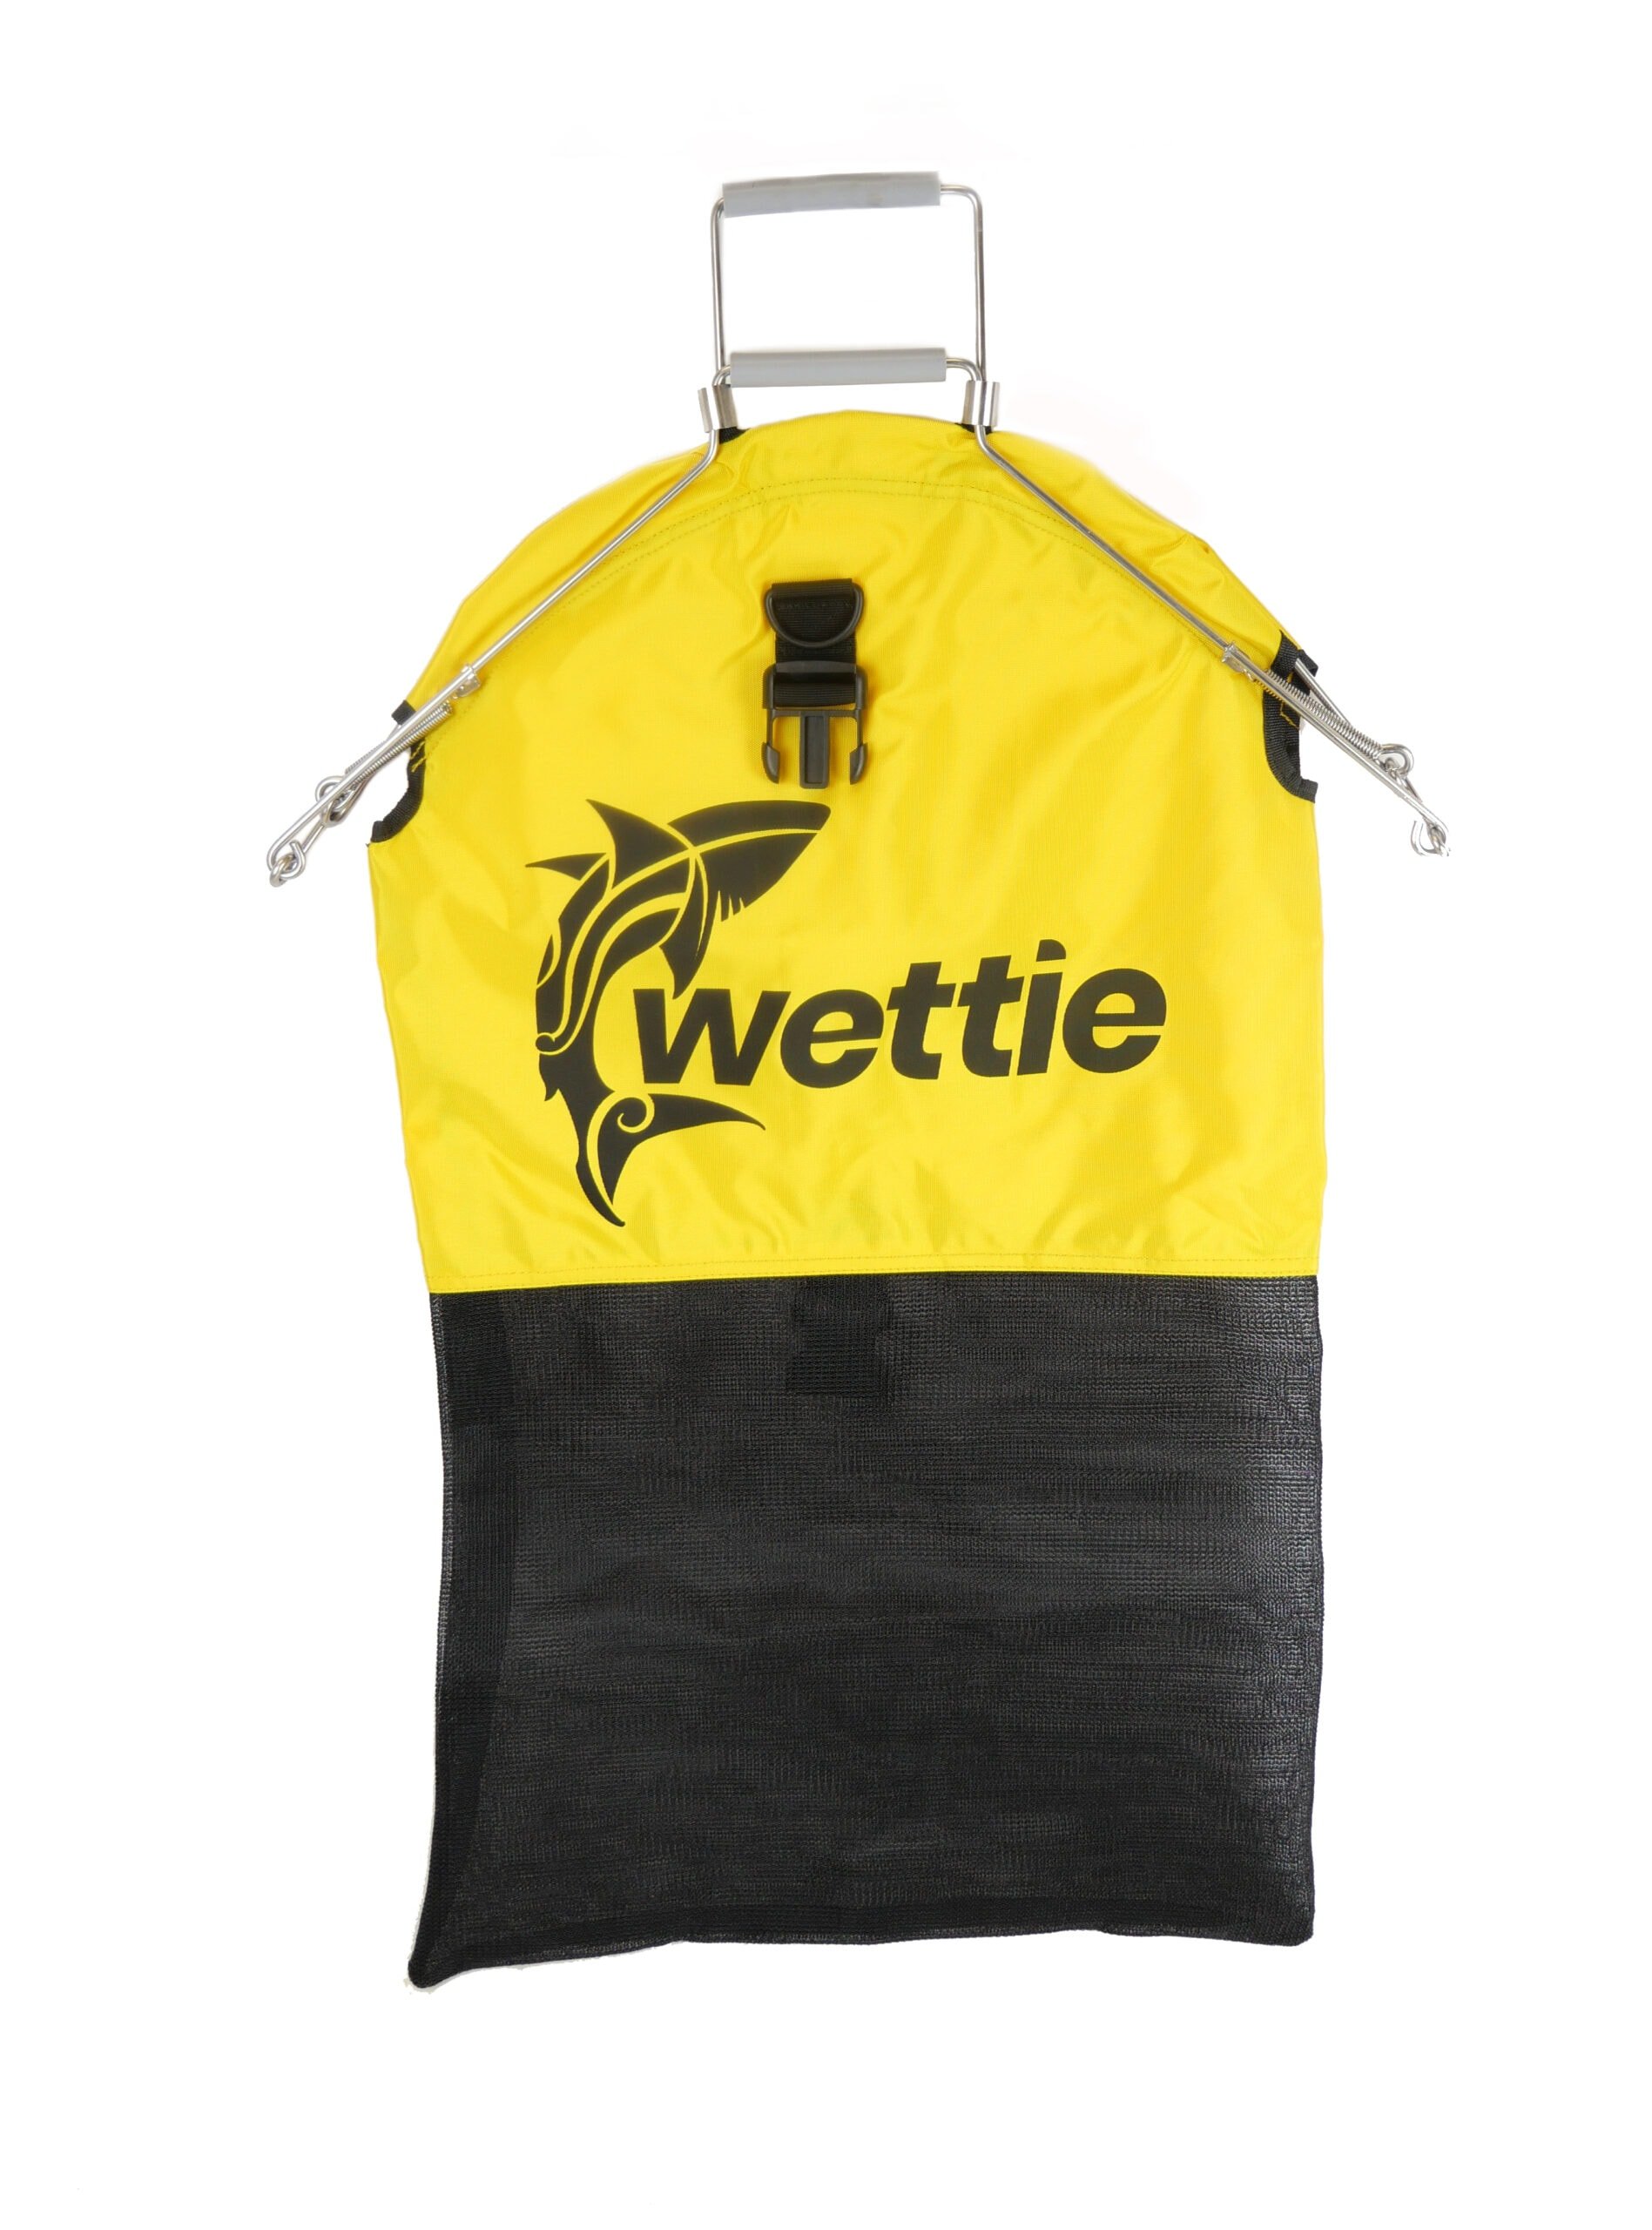 CATCH BAGS - Wettie NZ  Spearfishing Wetsuits & Dive Equipment